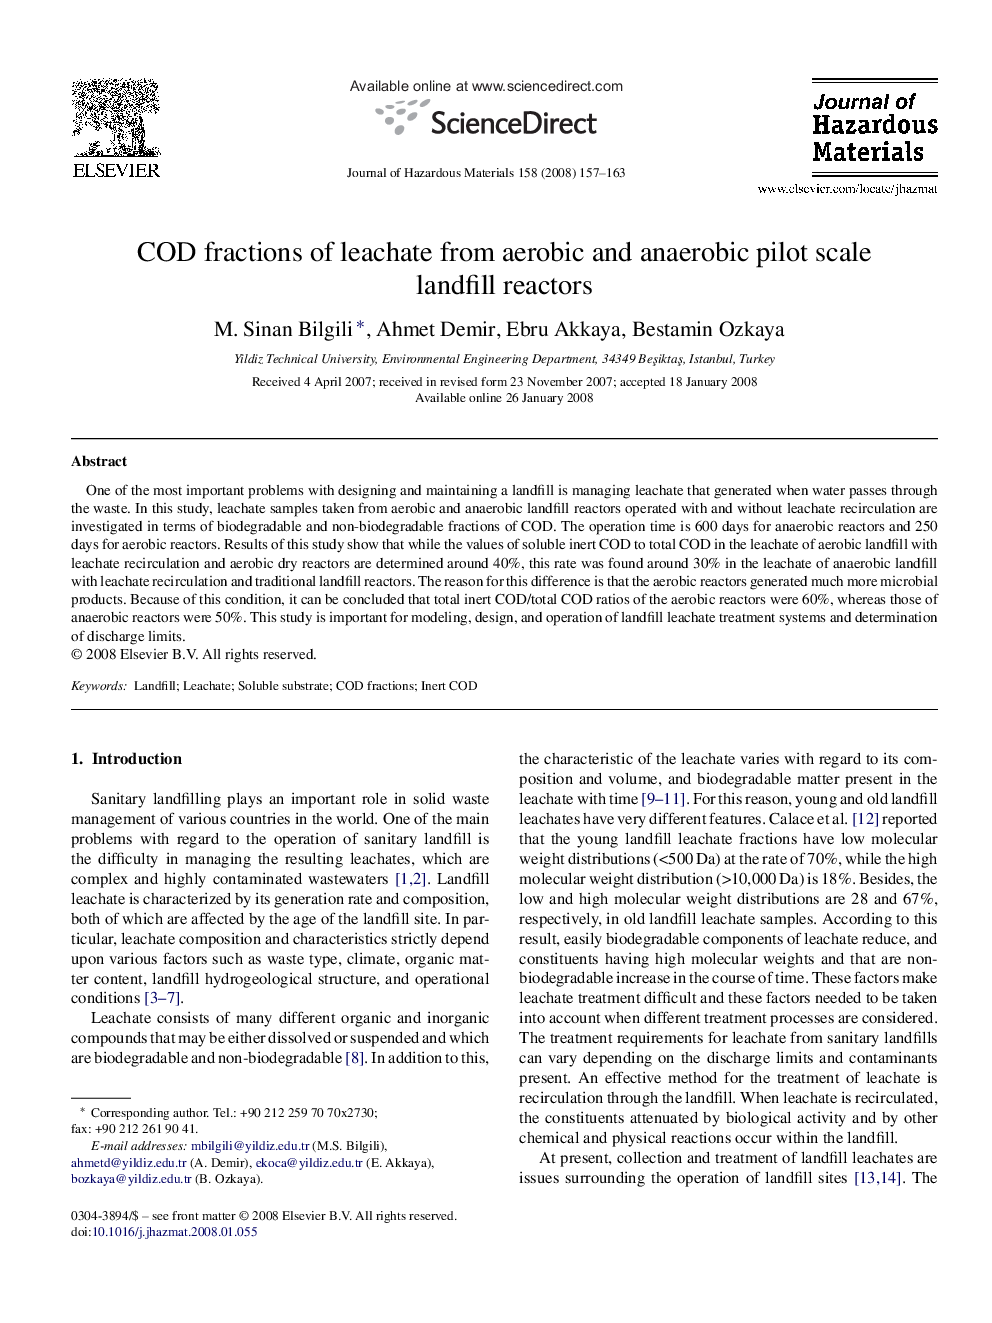 COD fractions of leachate from aerobic and anaerobic pilot scale landfill reactors